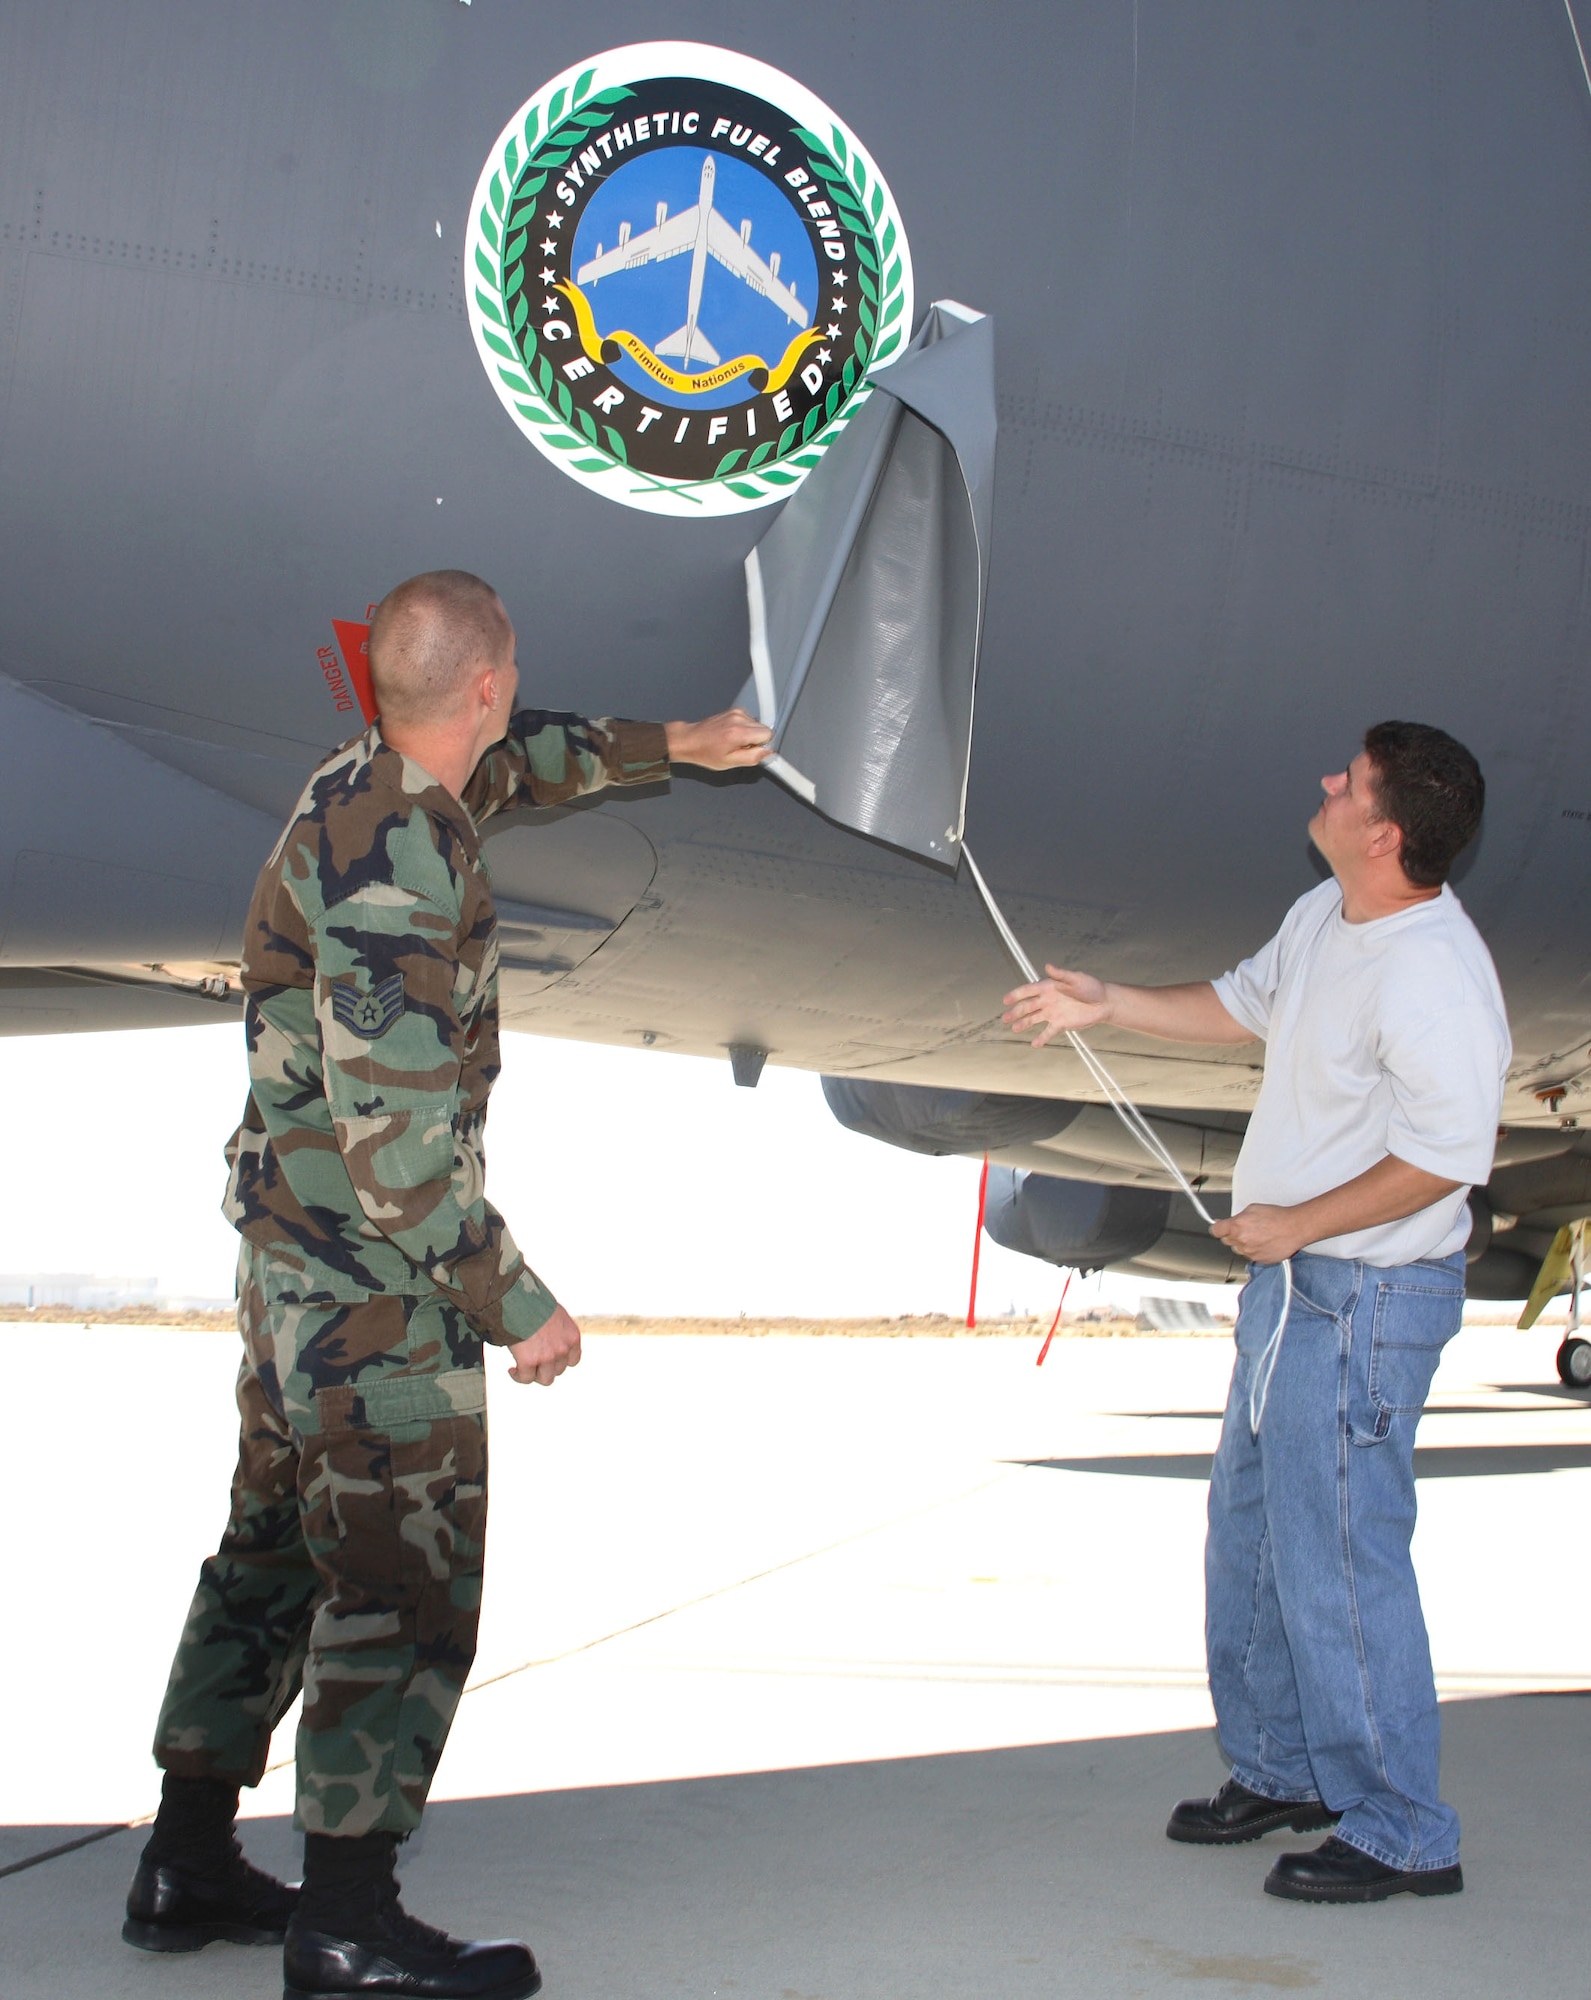 Staff Sgt. Joe Wallis and Johnny Sniderhan reveal the Fischer-Tropsch synthetic fuel blend certification logo painted on the side of a B-52H Stratofortress at the certification ceremony at Edwards Air Force Base, Calif., Aug. 8. Sergeant Wallis is with the 31st Test and Evaluation Squadron; Mr. Sniderhan is with the 912th Aircraft Maintenance Squadron. (U.S. Air Force photo/Jet Fabara)  